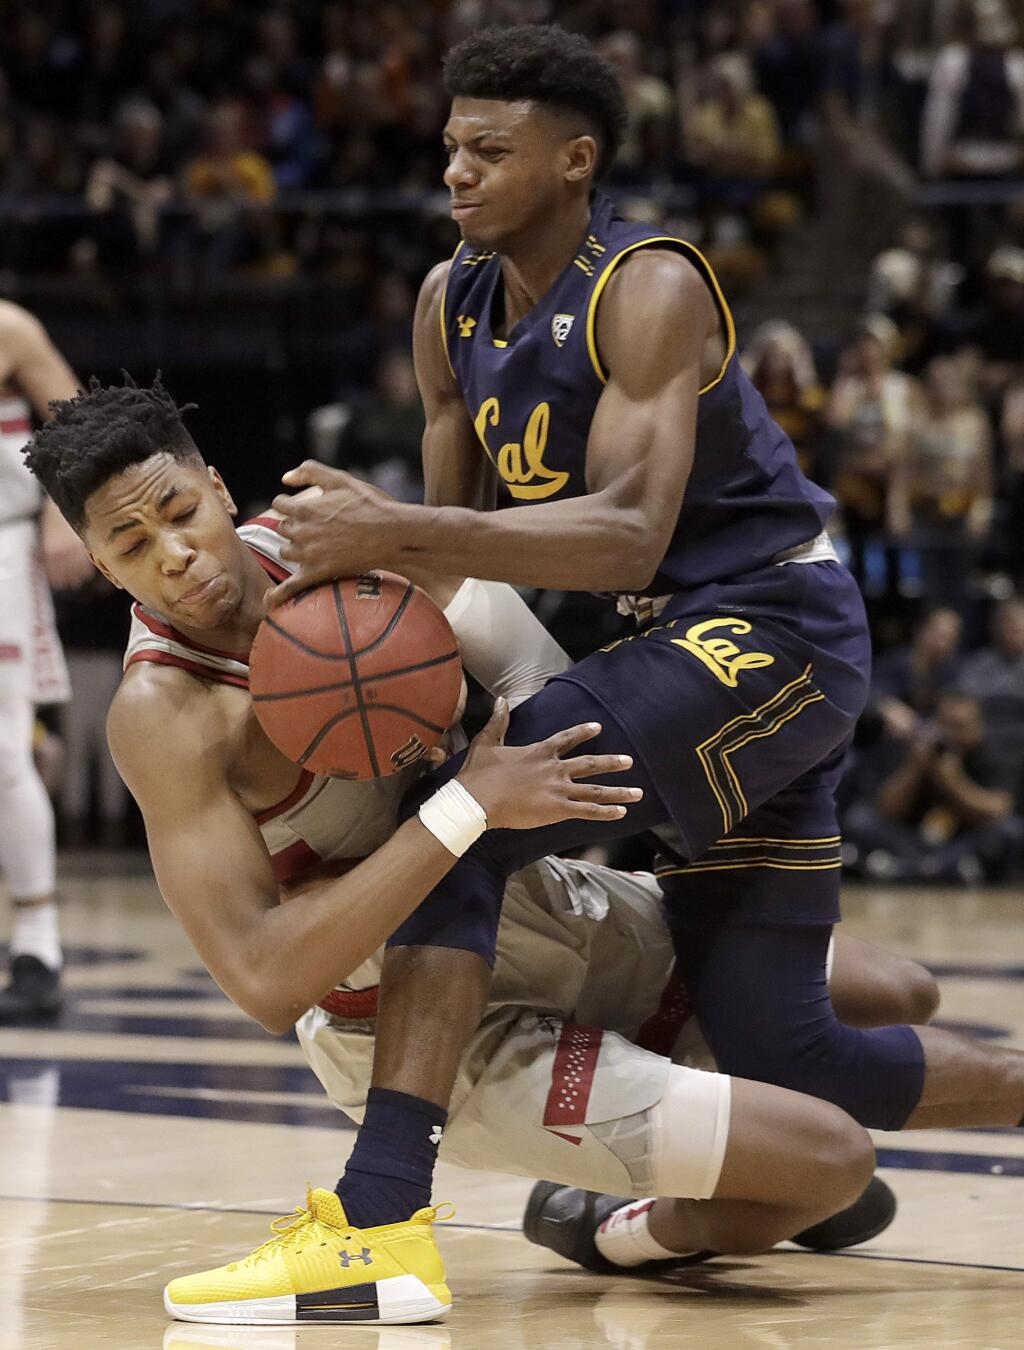 California guard Darius McNeill, top, and Stanford forward KZ Okpala fight for the ball during the first half of an NCAA college basketball game in Berkeley, Sunday, Feb. 18, 2018. (AP Photo/Jeff Chiu)